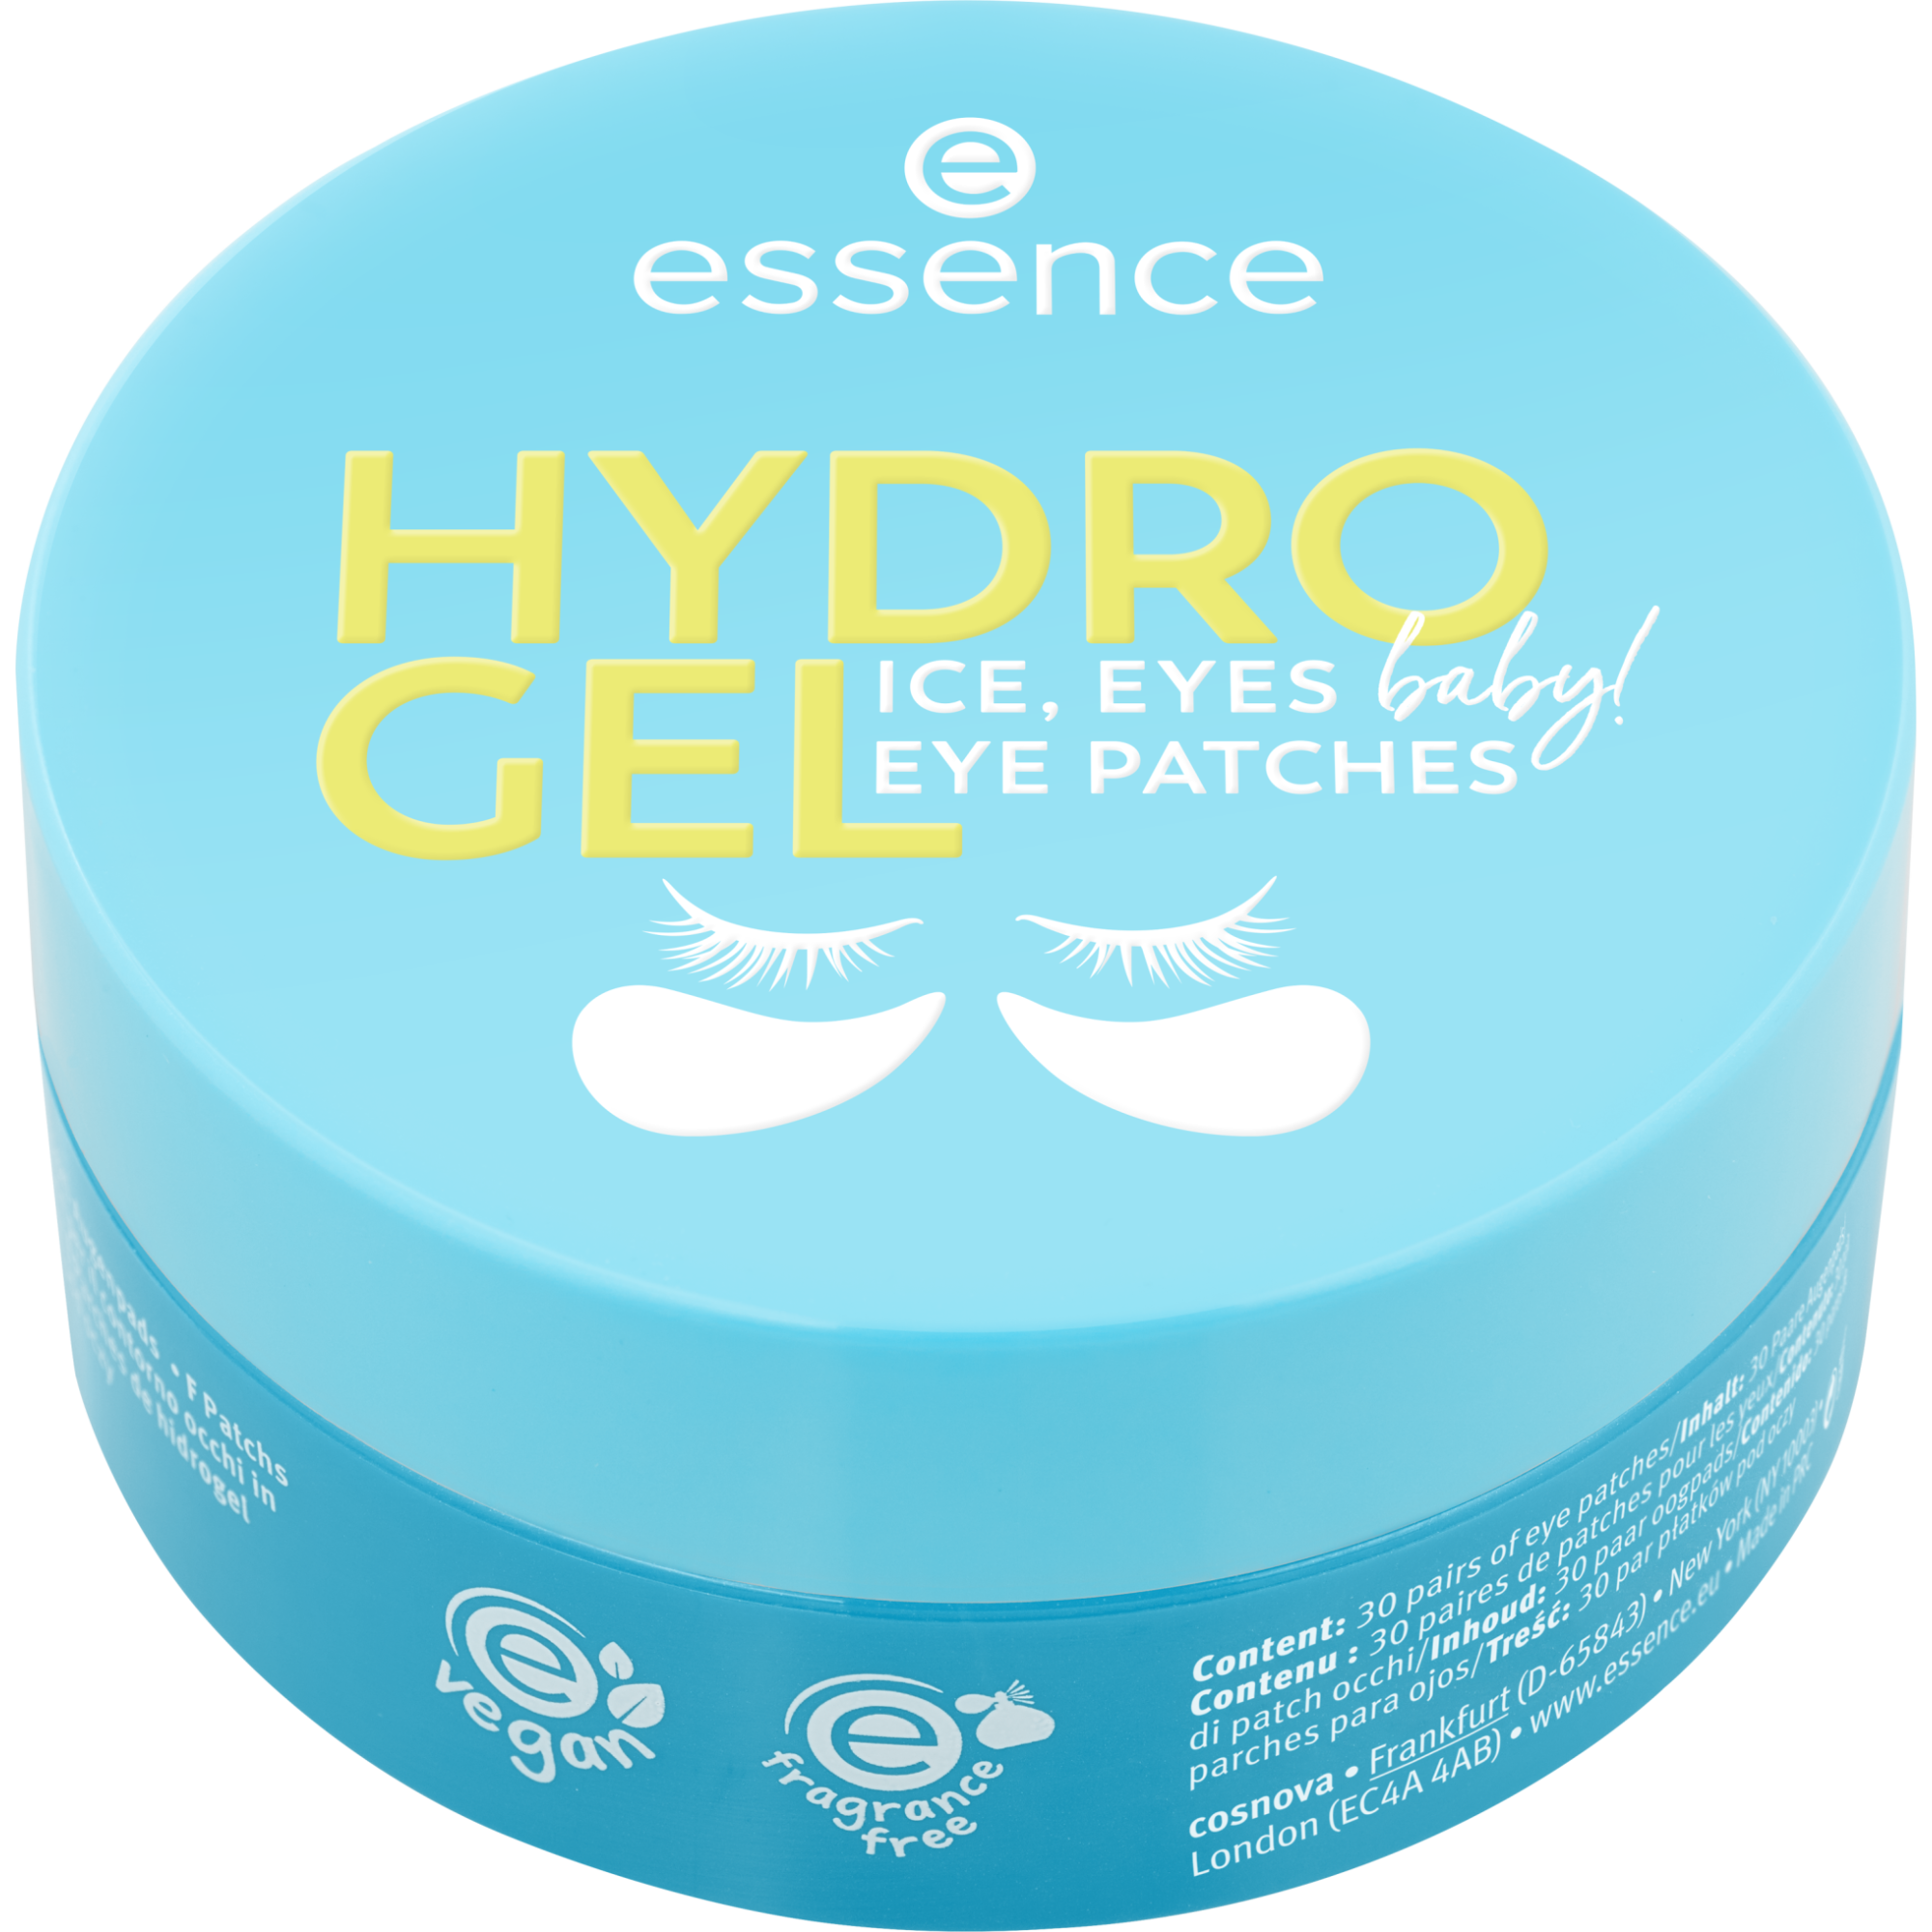 HYDRO GEL eye patches ICE, EYES, baby! 30 Pairs